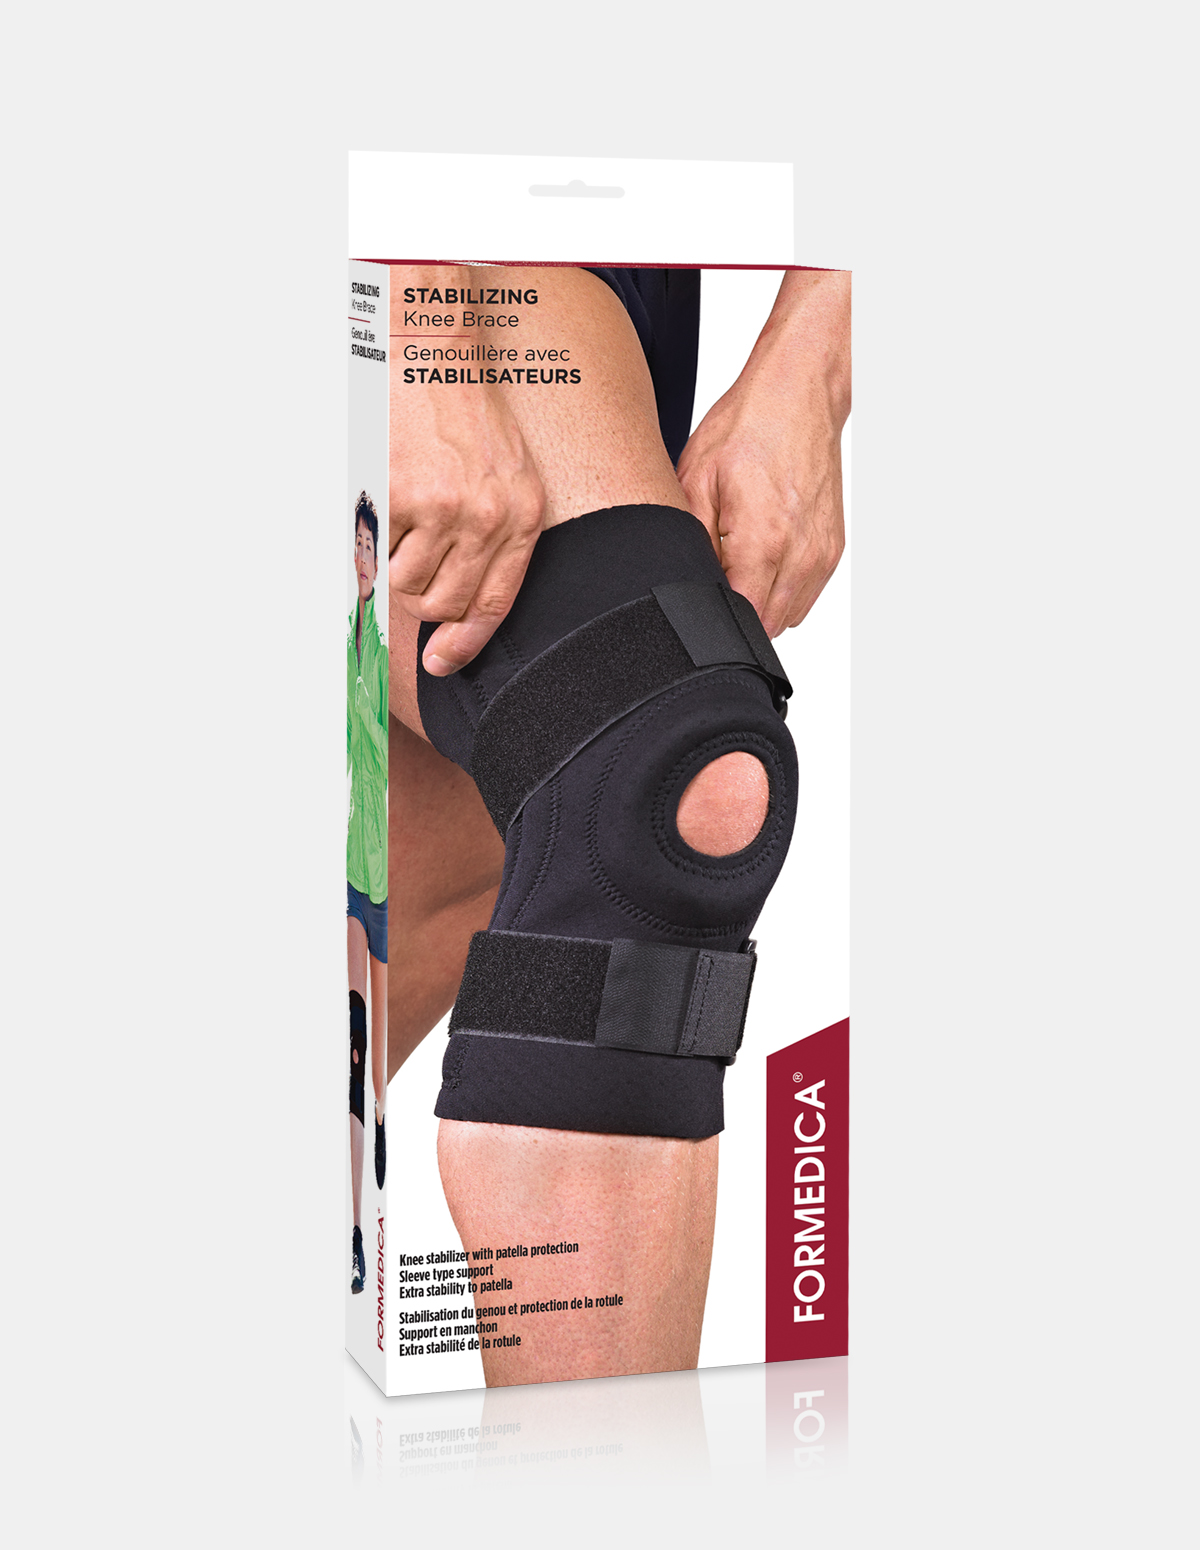 Post-Op Knee Brace, Stability & Support Post Surgery